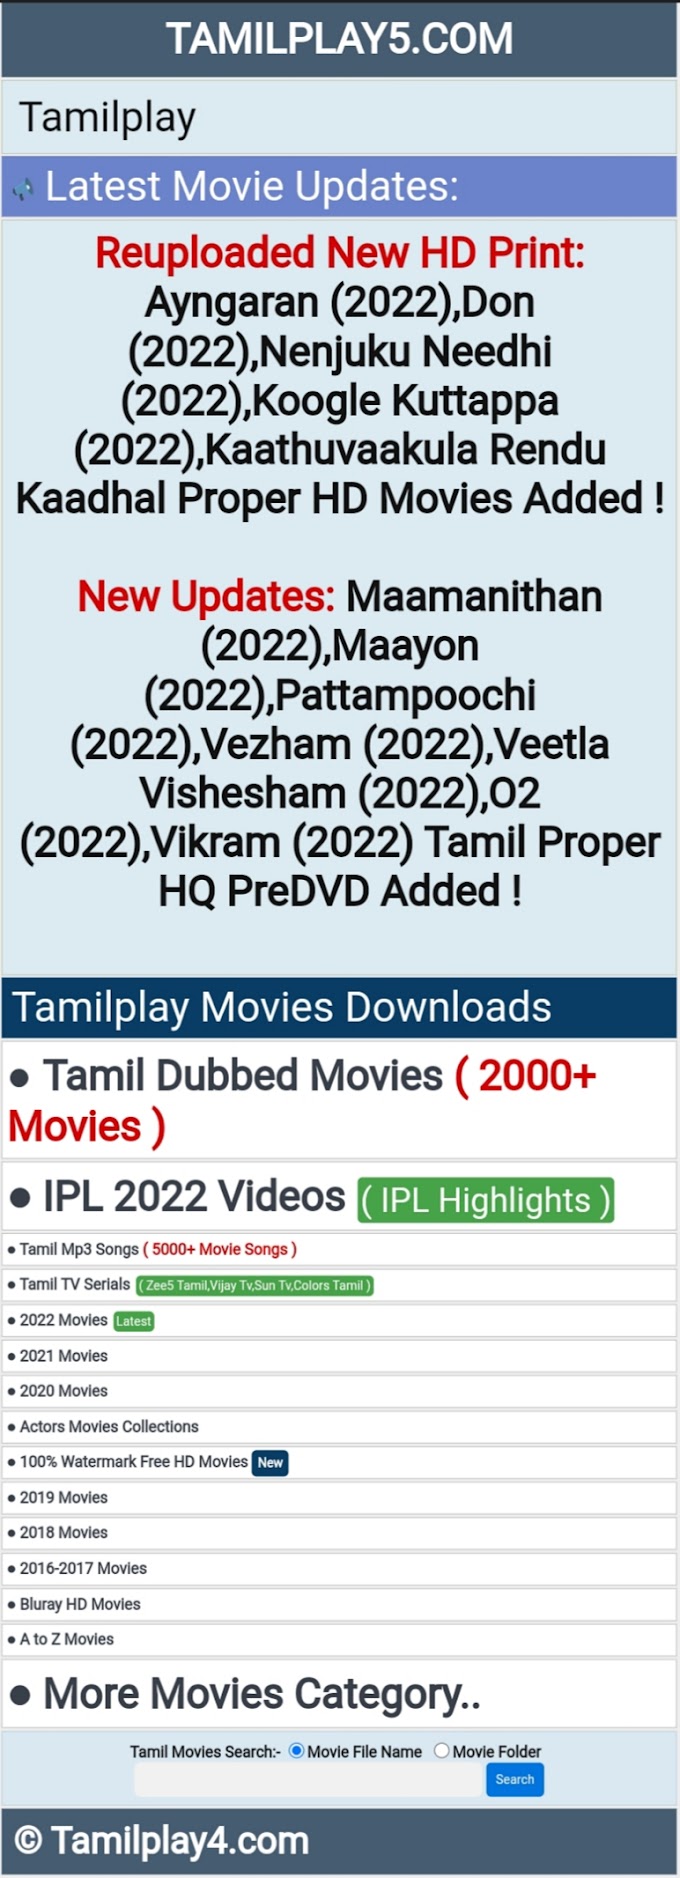 Tamilplay Bollywood, Hollywood, South HD Full Movie Free Download And Watch Latest Movie Free On Tamilplay.com